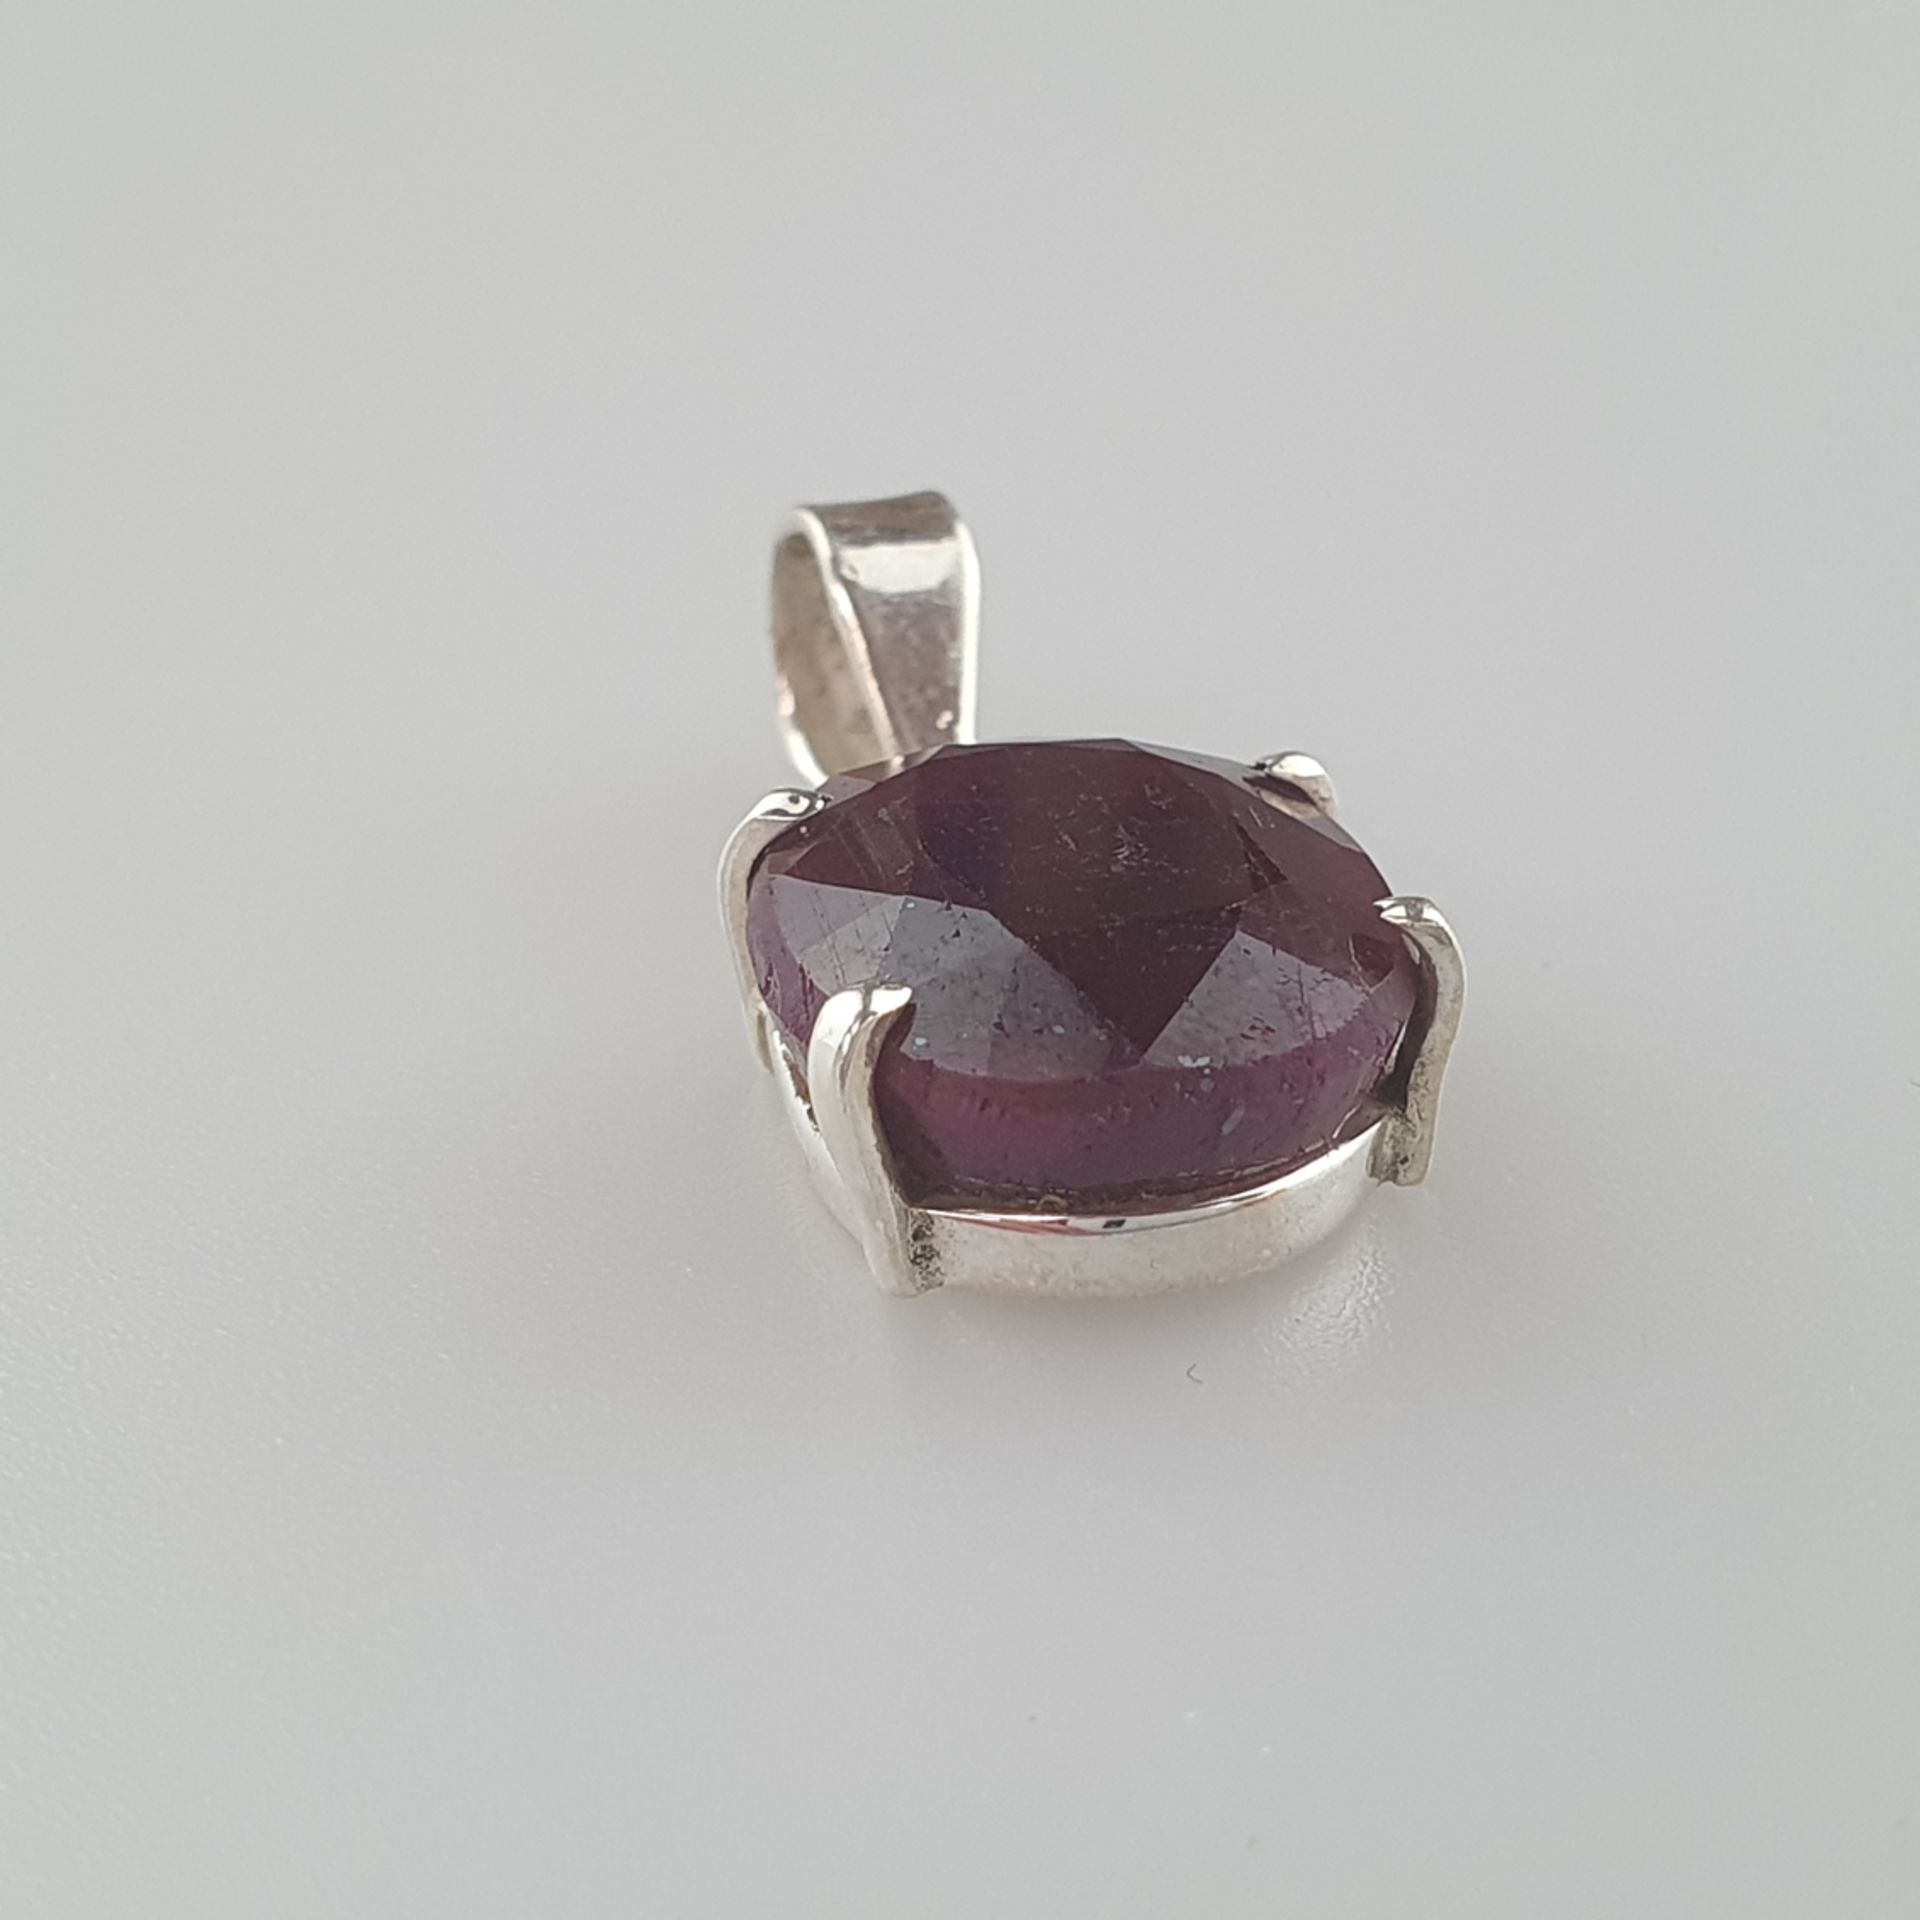 Rubin-Anhänger - 925er Silber, besetzt mit facettier | 925 Silver Pendant with a Ruby of 15ct, ca. - Image 2 of 4